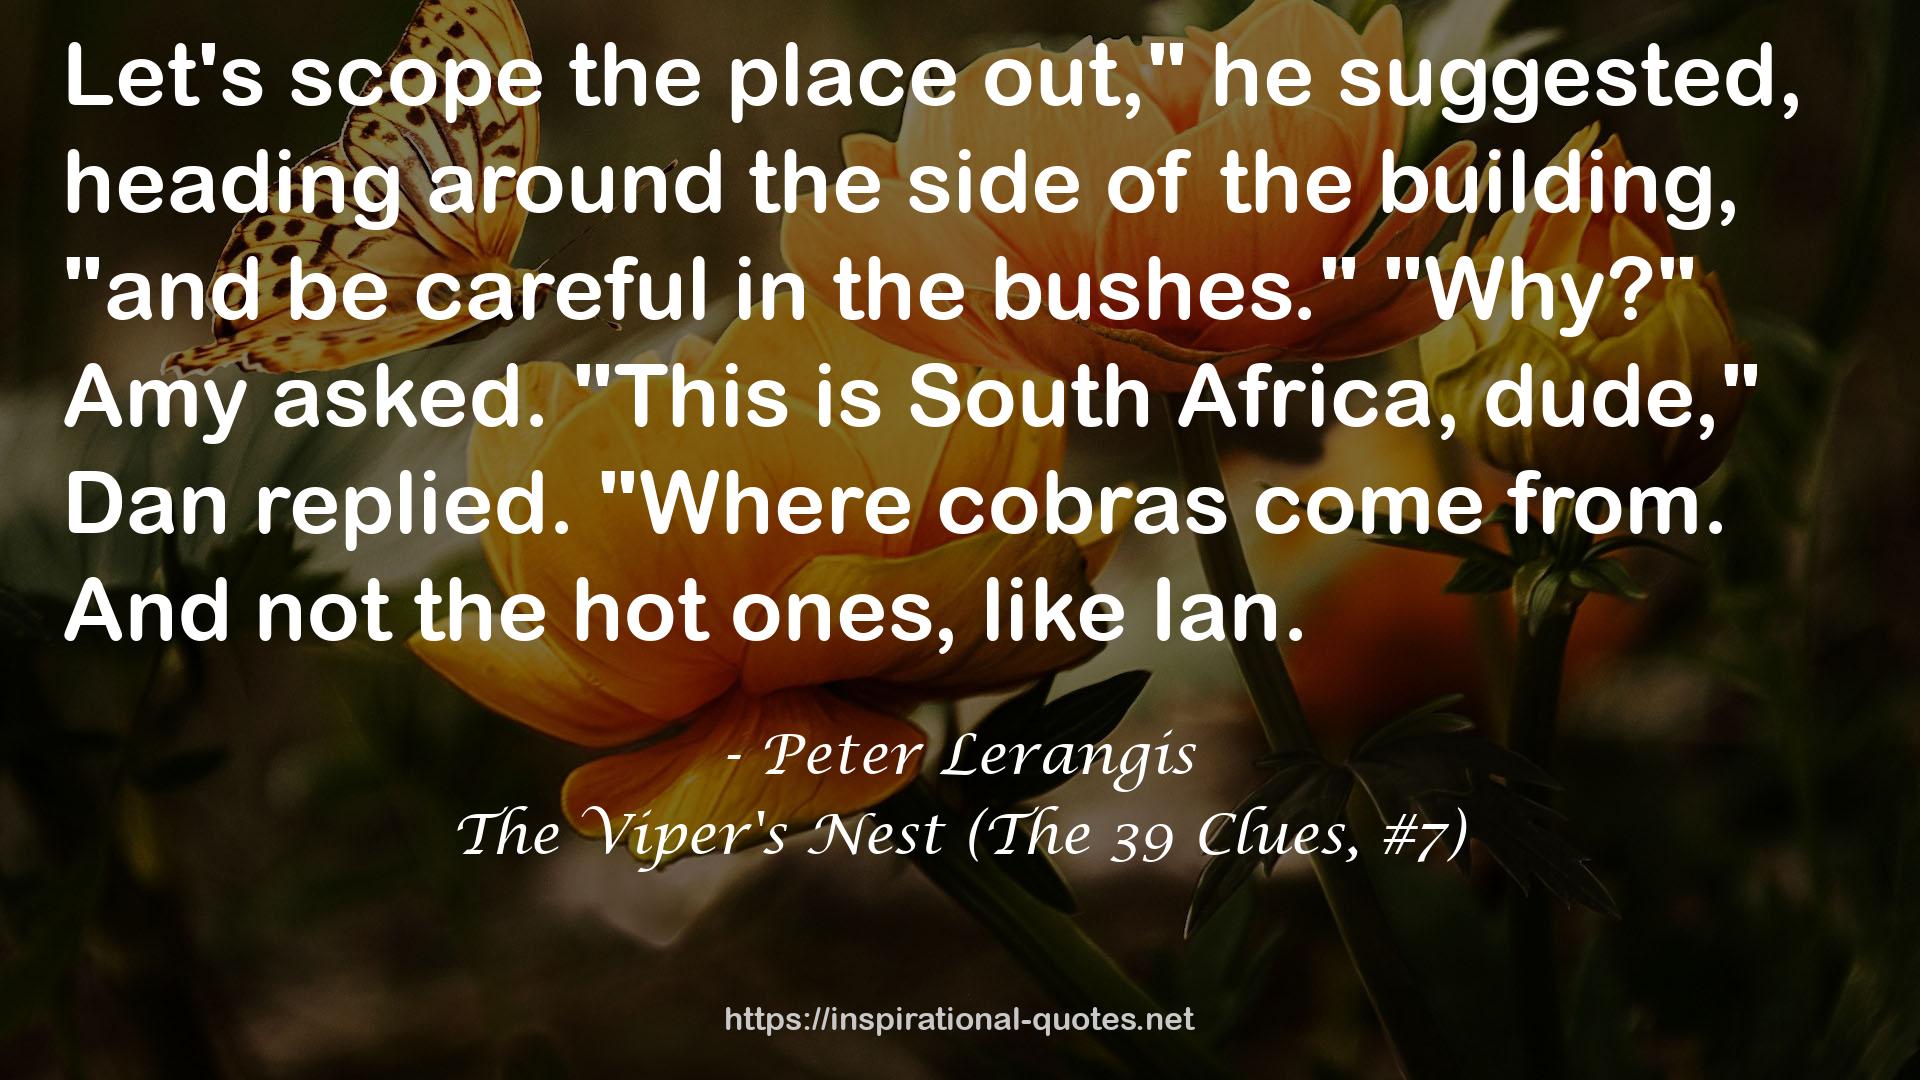 The Viper's Nest (The 39 Clues, #7) QUOTES